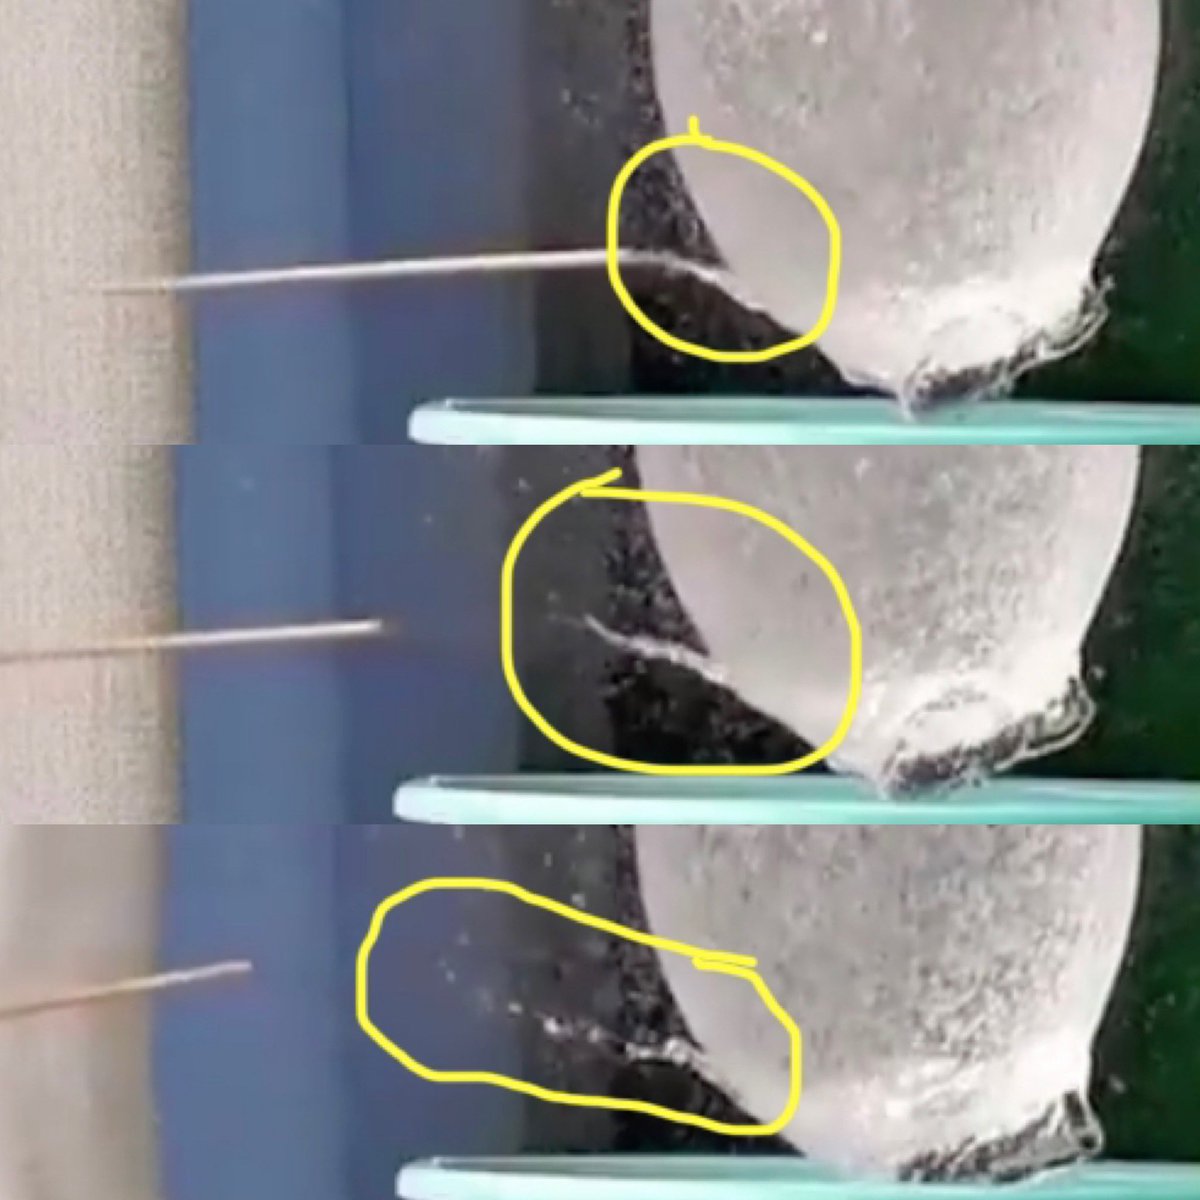 14/ Next cool thing. Notice how the stick exiting the sphere of water pulls a jet of water with it. There would be low pressure behind the stick, so water rushes in the fill the vacuum and gets pulled along behind the stick. But it is a thin jet so it fragments into droplets.